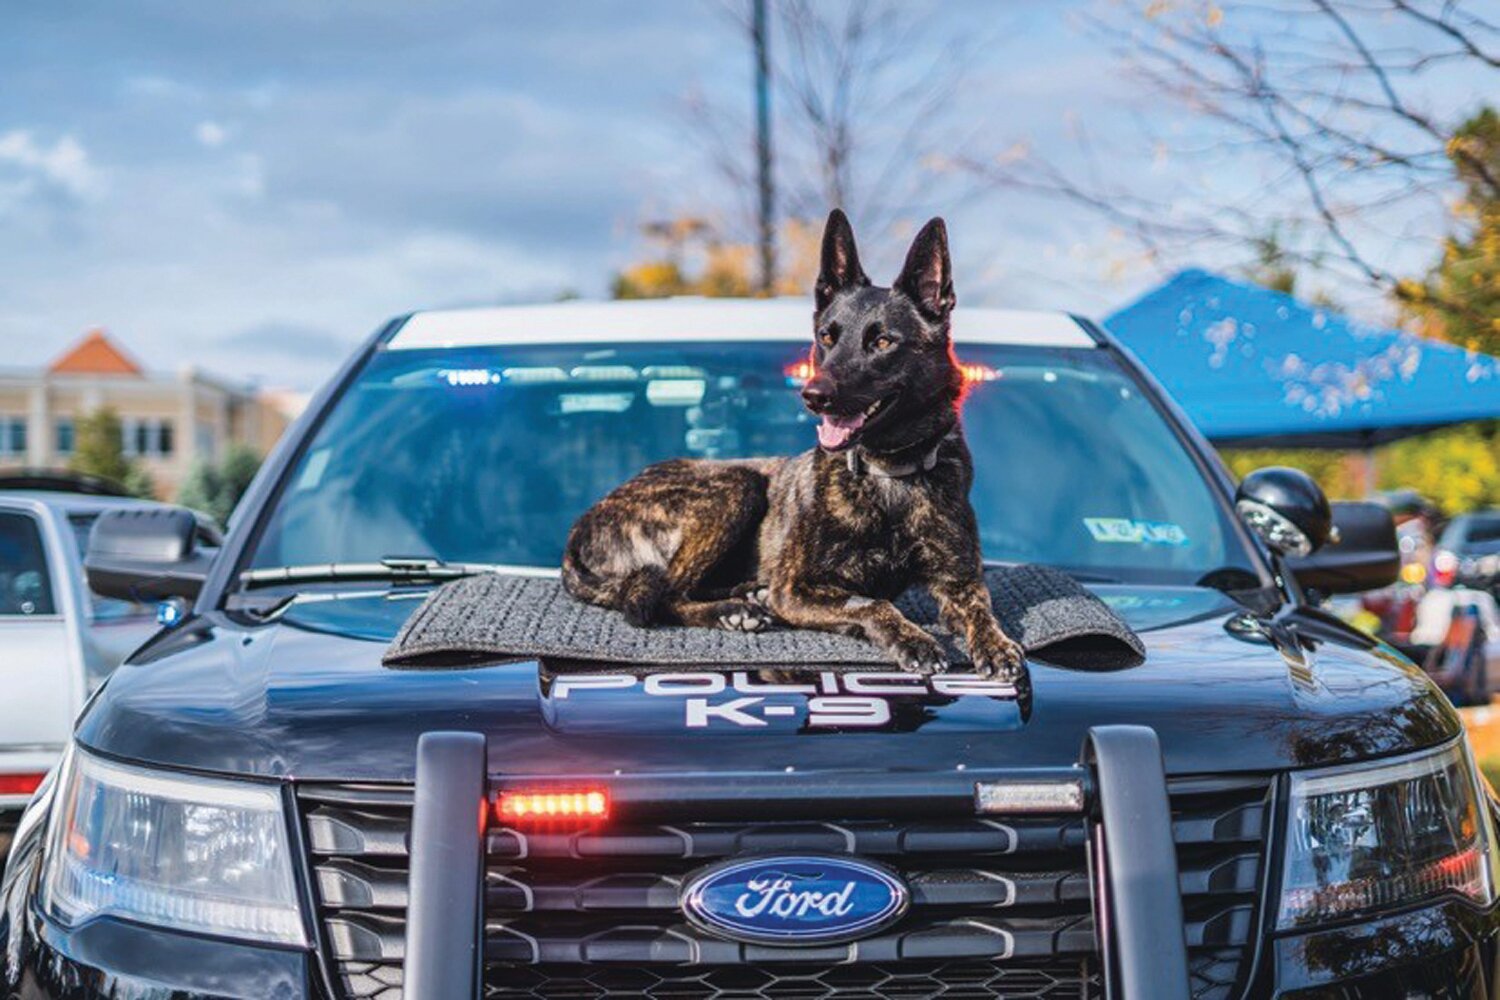 K9 Jolie sits atop a police vehicle.